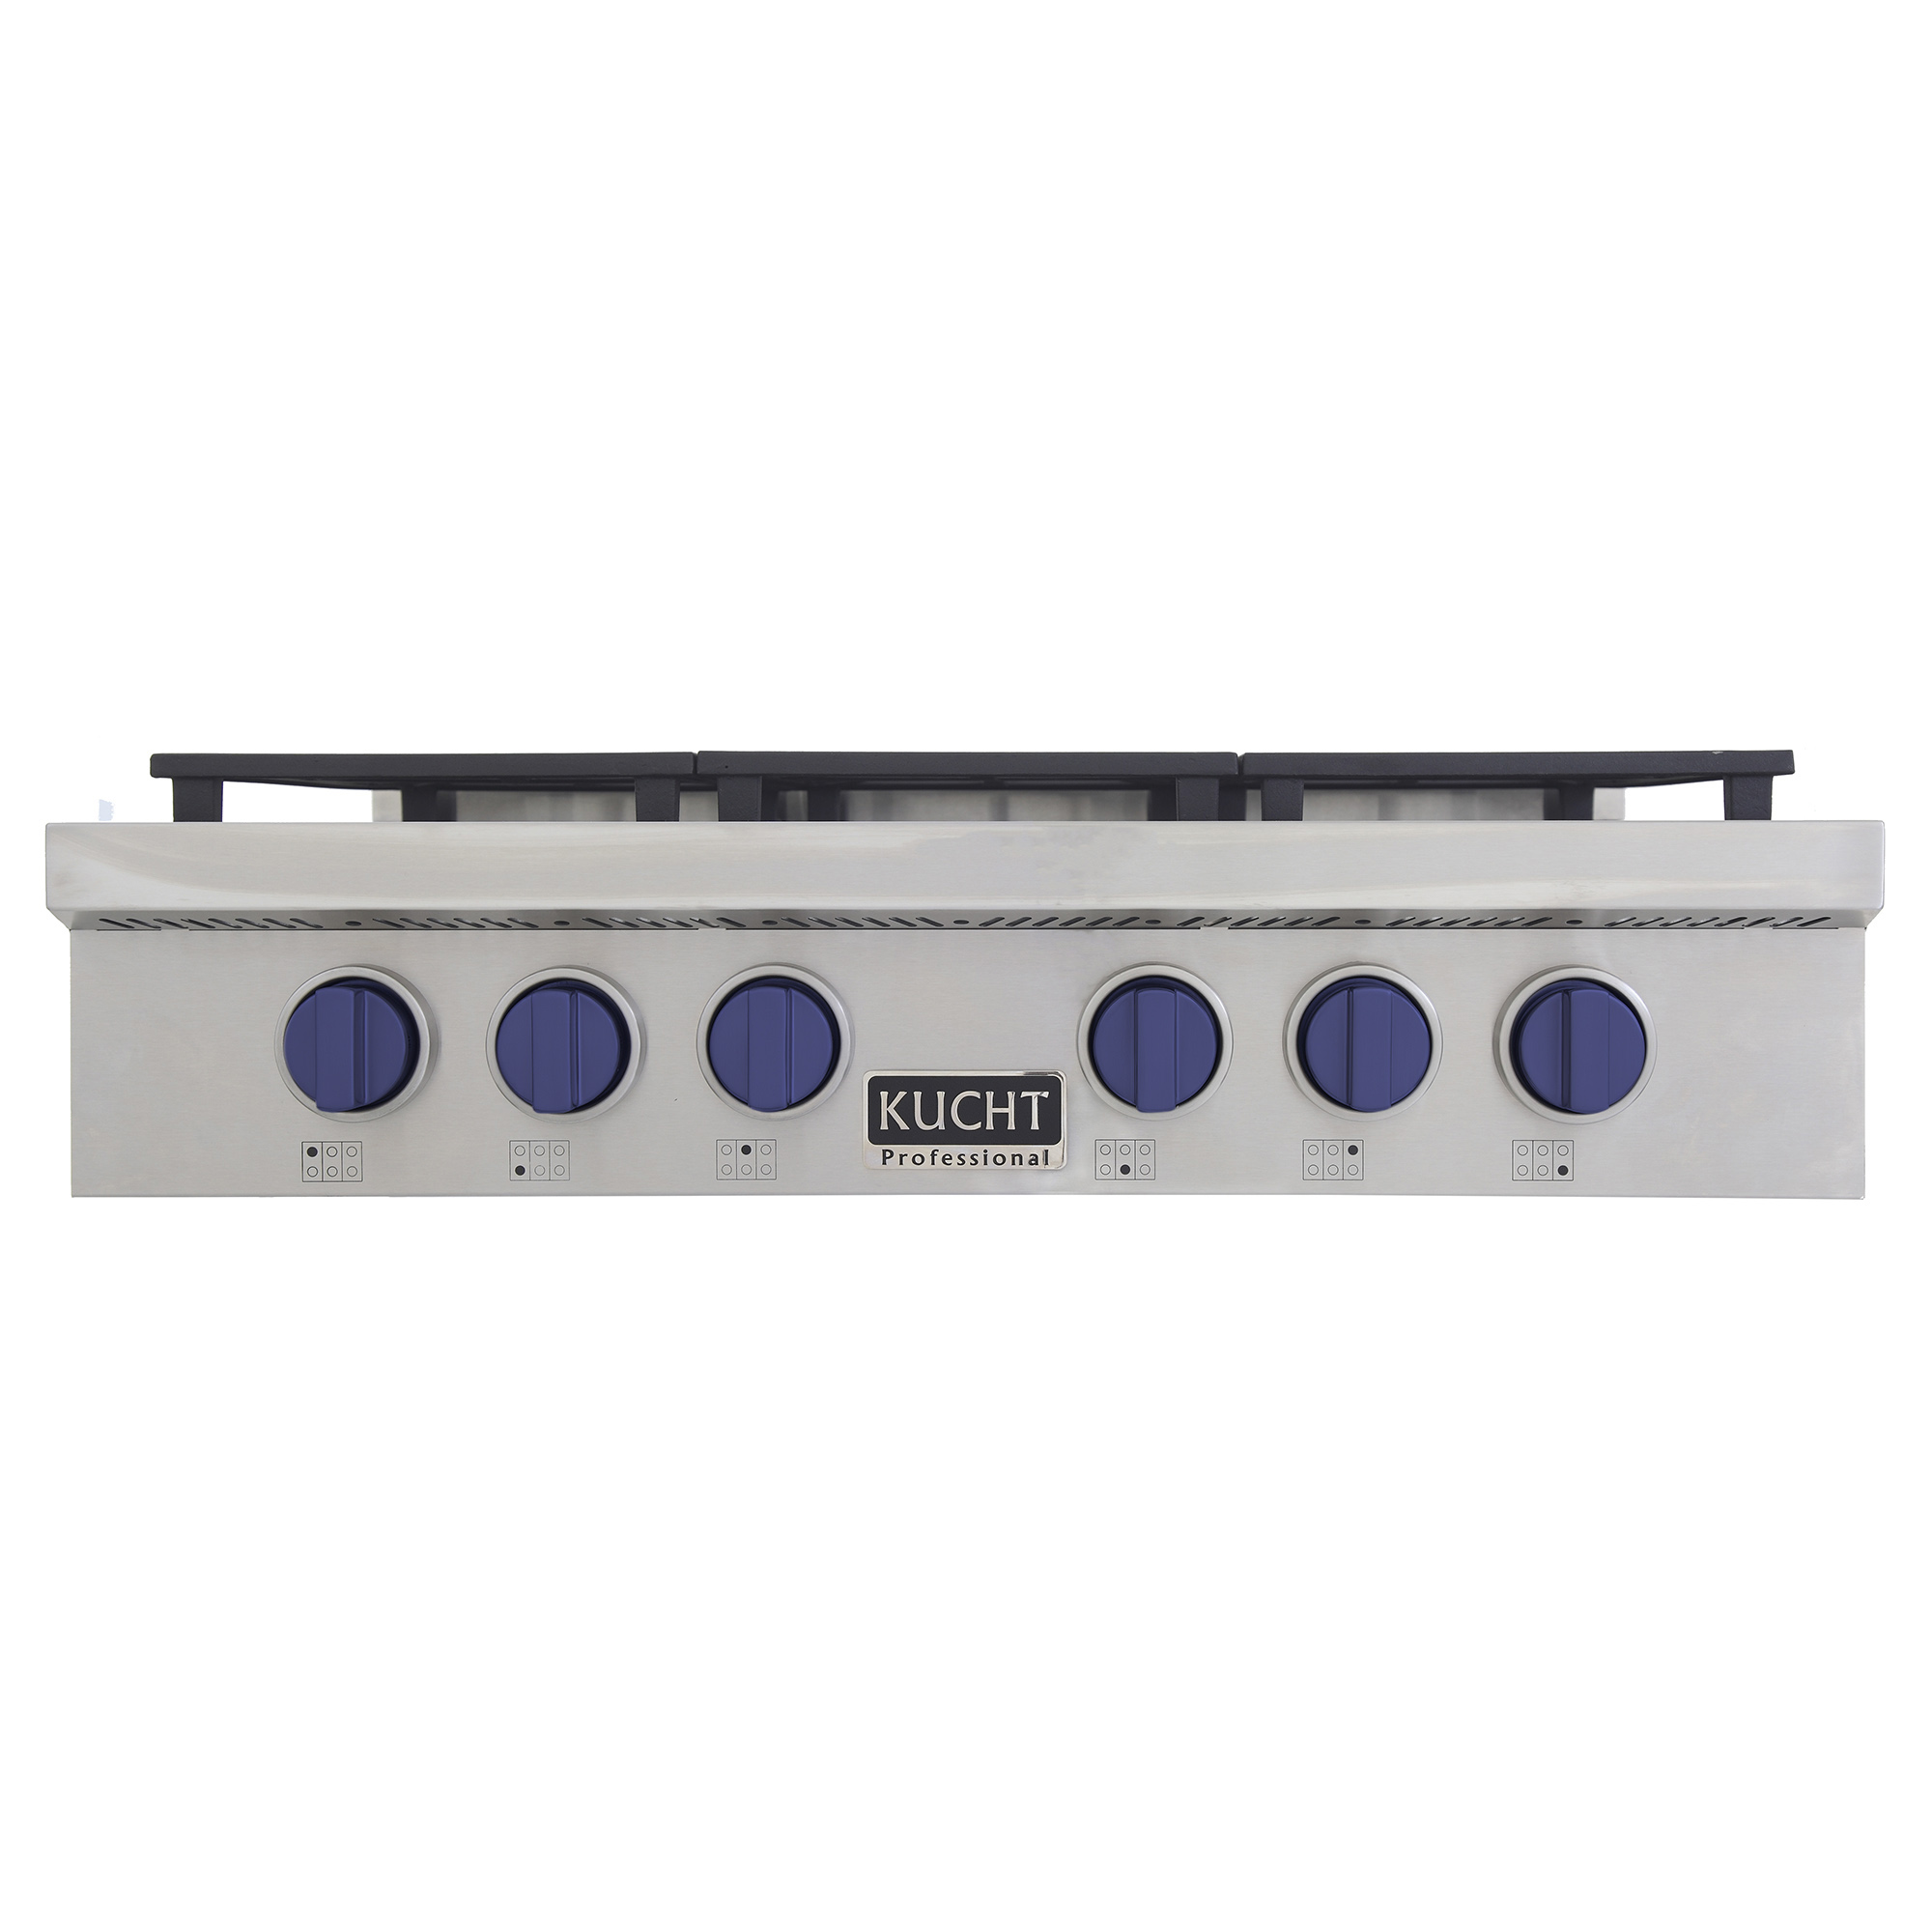 KUCHT Professional 36 in. Natural Gas Range Top with Sealed Burners in Stainless Steel with Royal Blue Knobs 